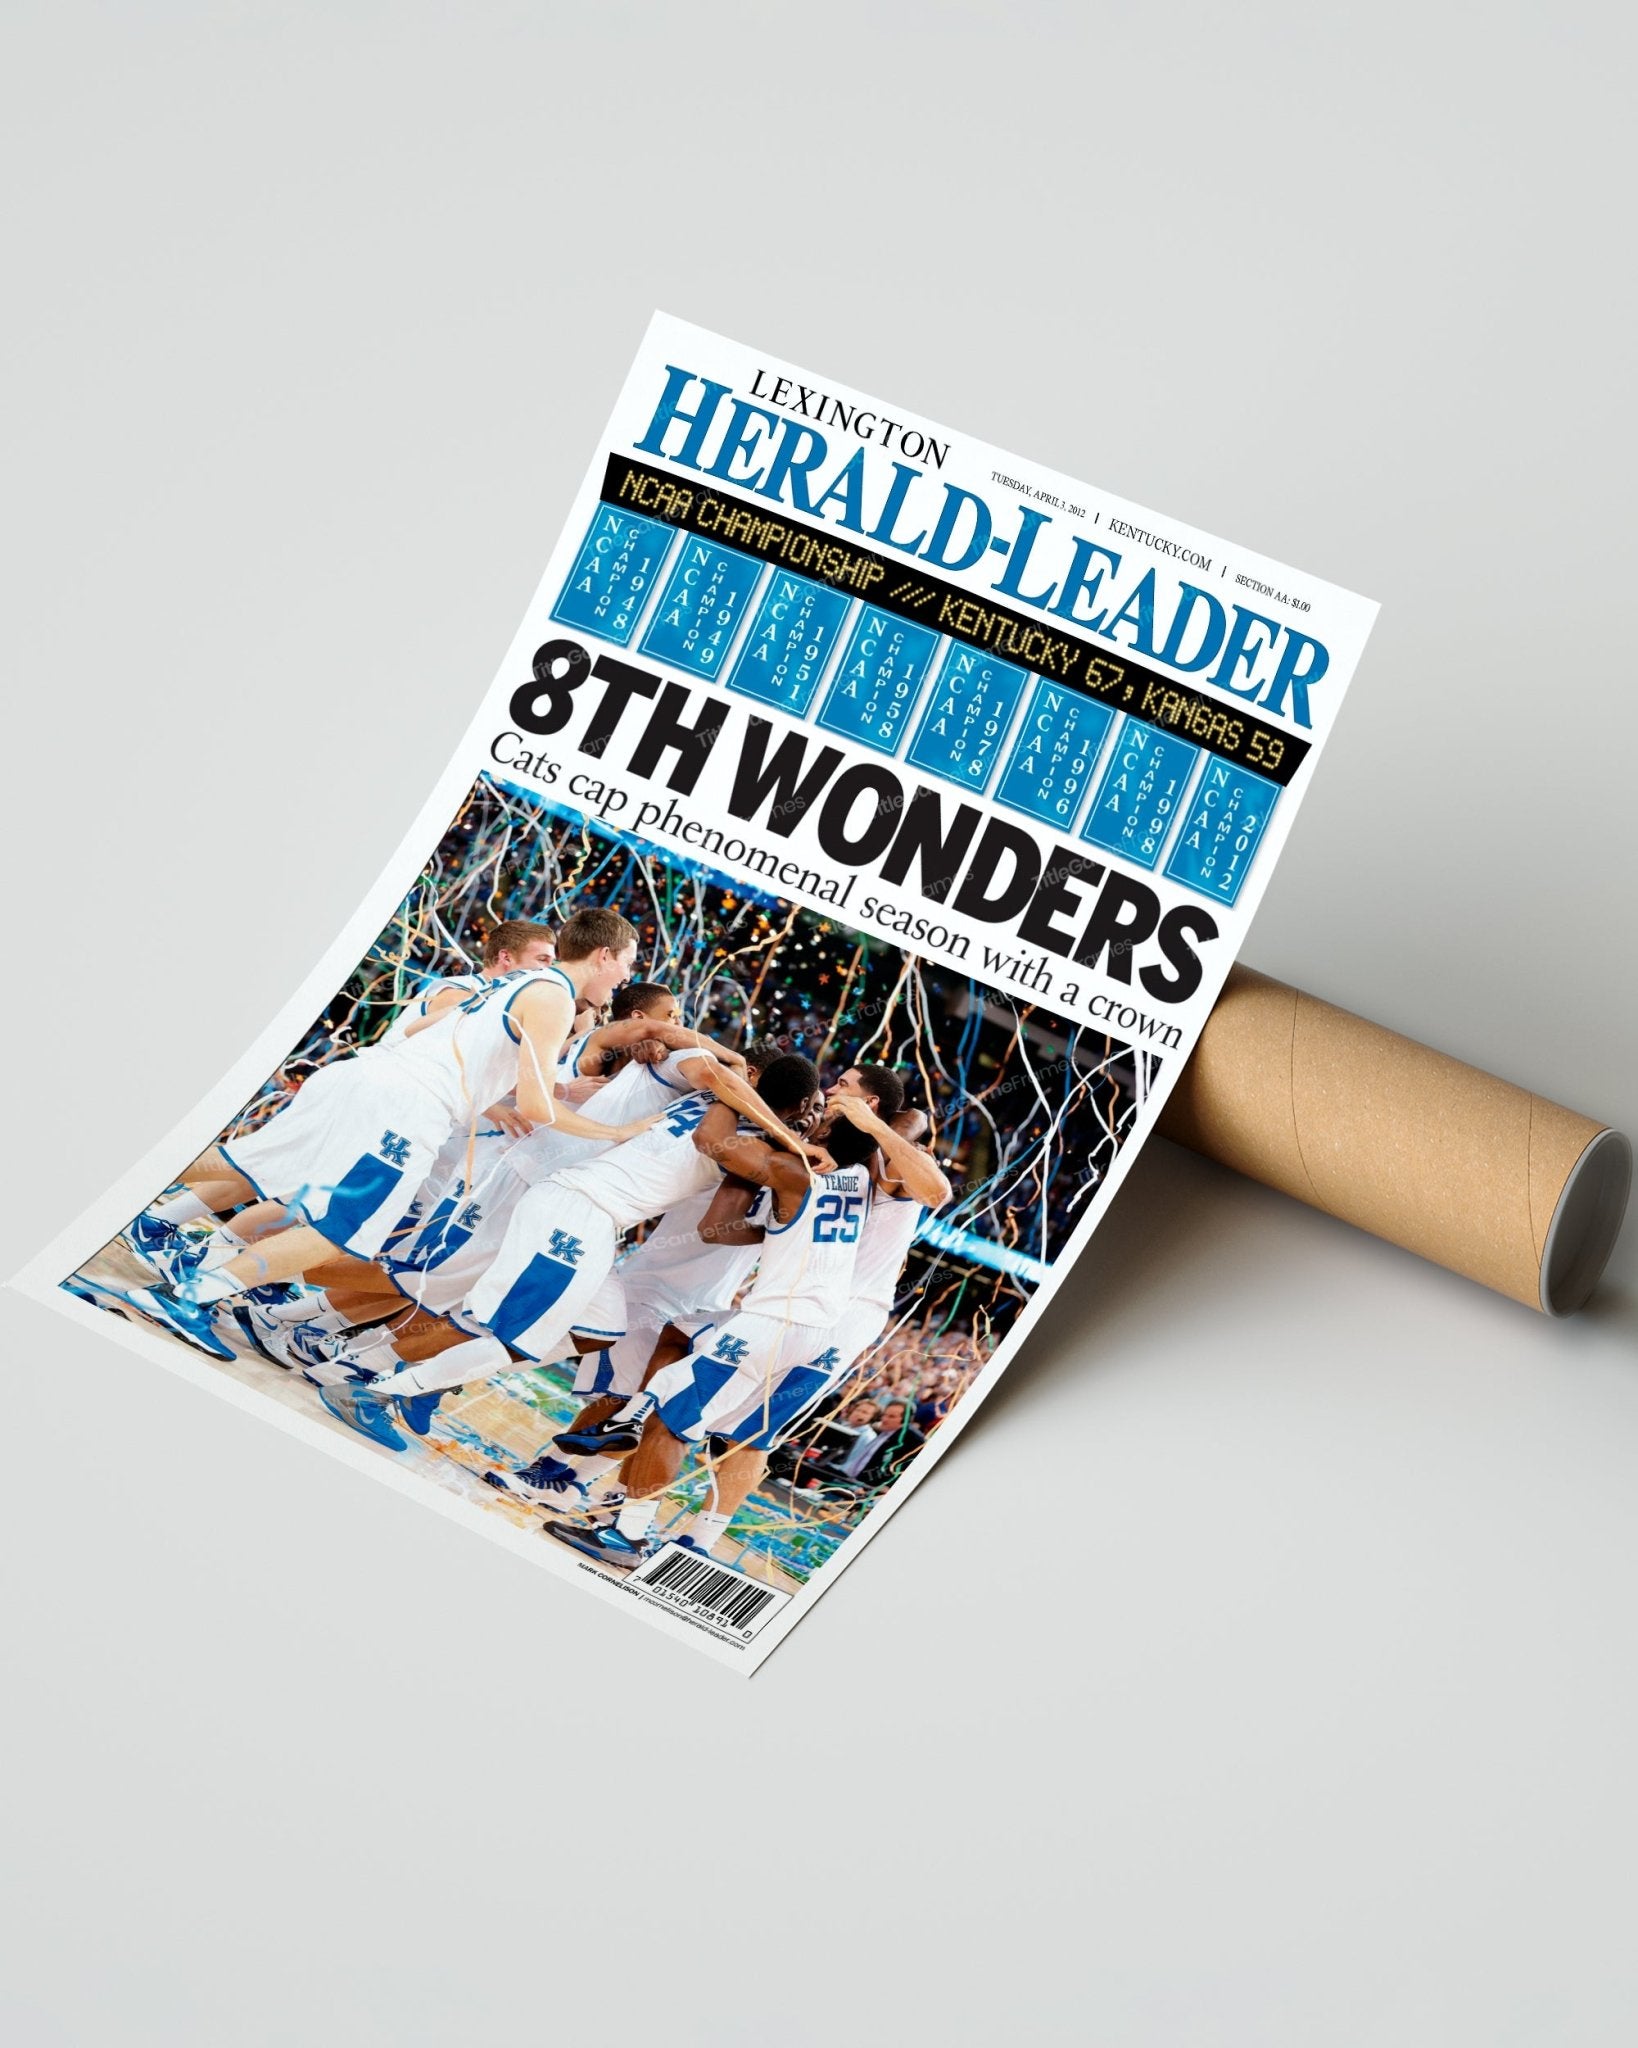 2012 Kentucky Wildcats "8th Wonder" NCAA College Basketball Champions Framed Front Page Newspaper Print - Title Game Frames